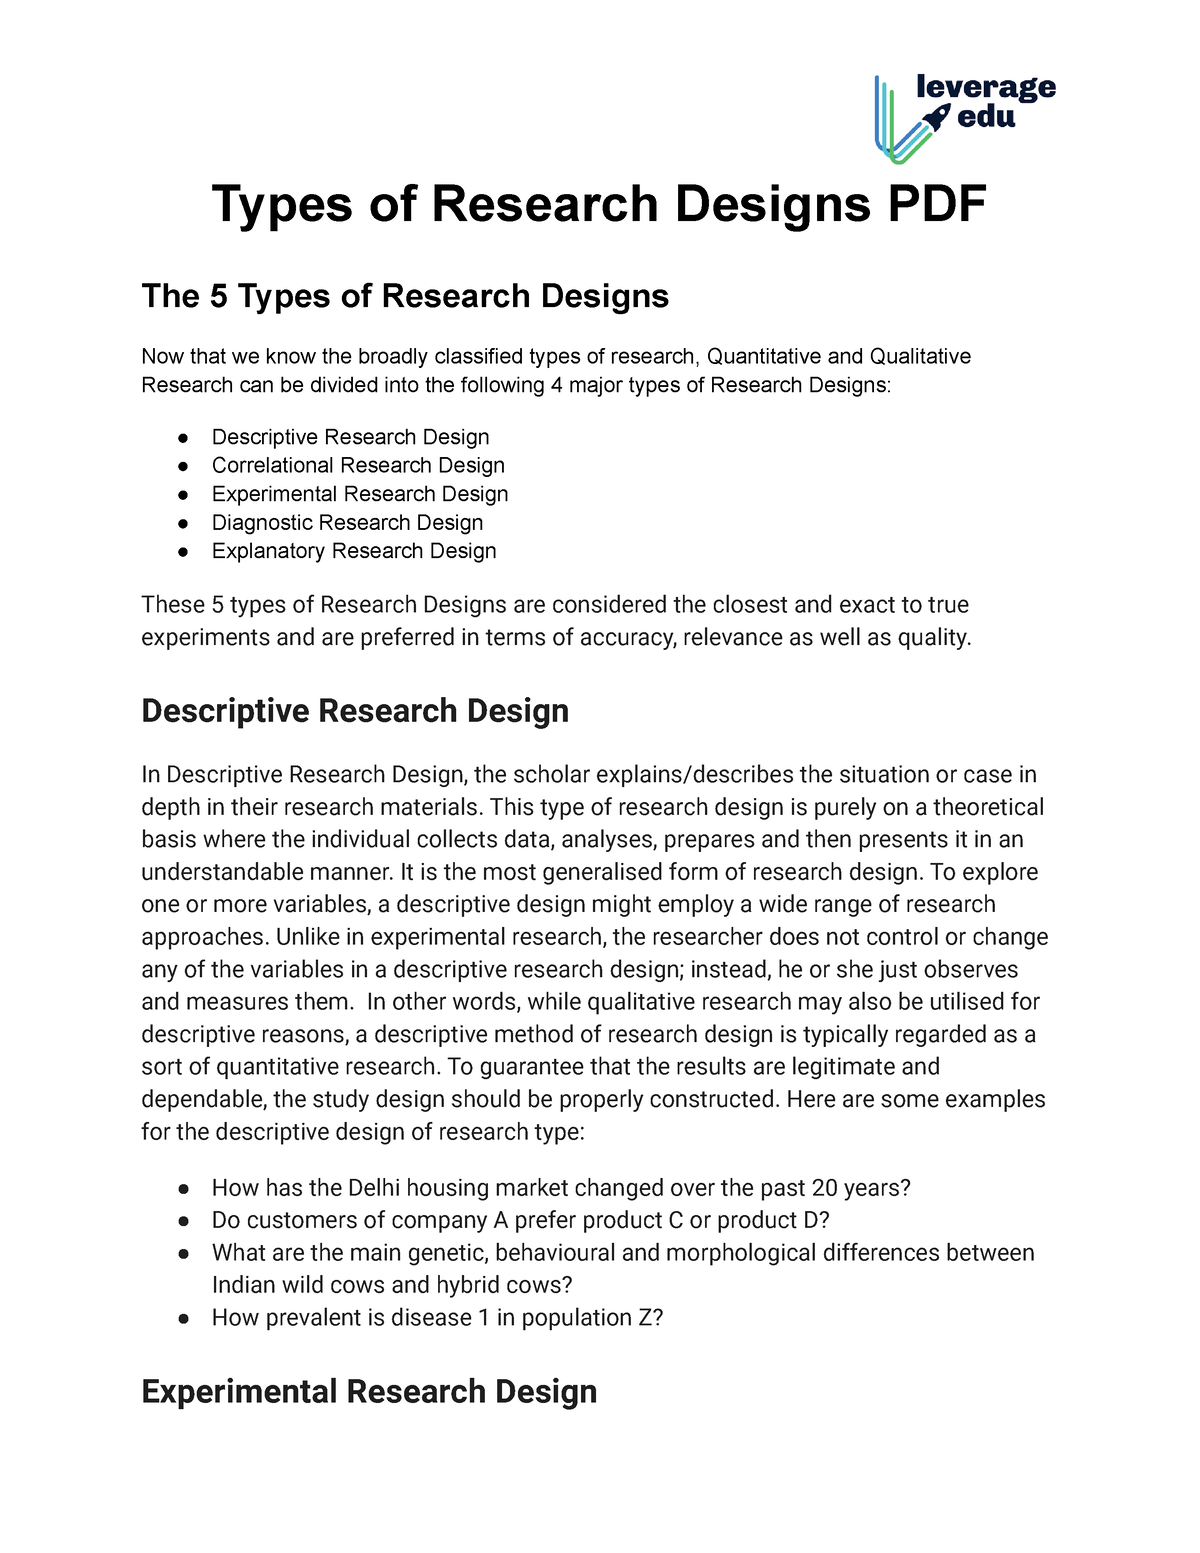 how to make a research design pdf